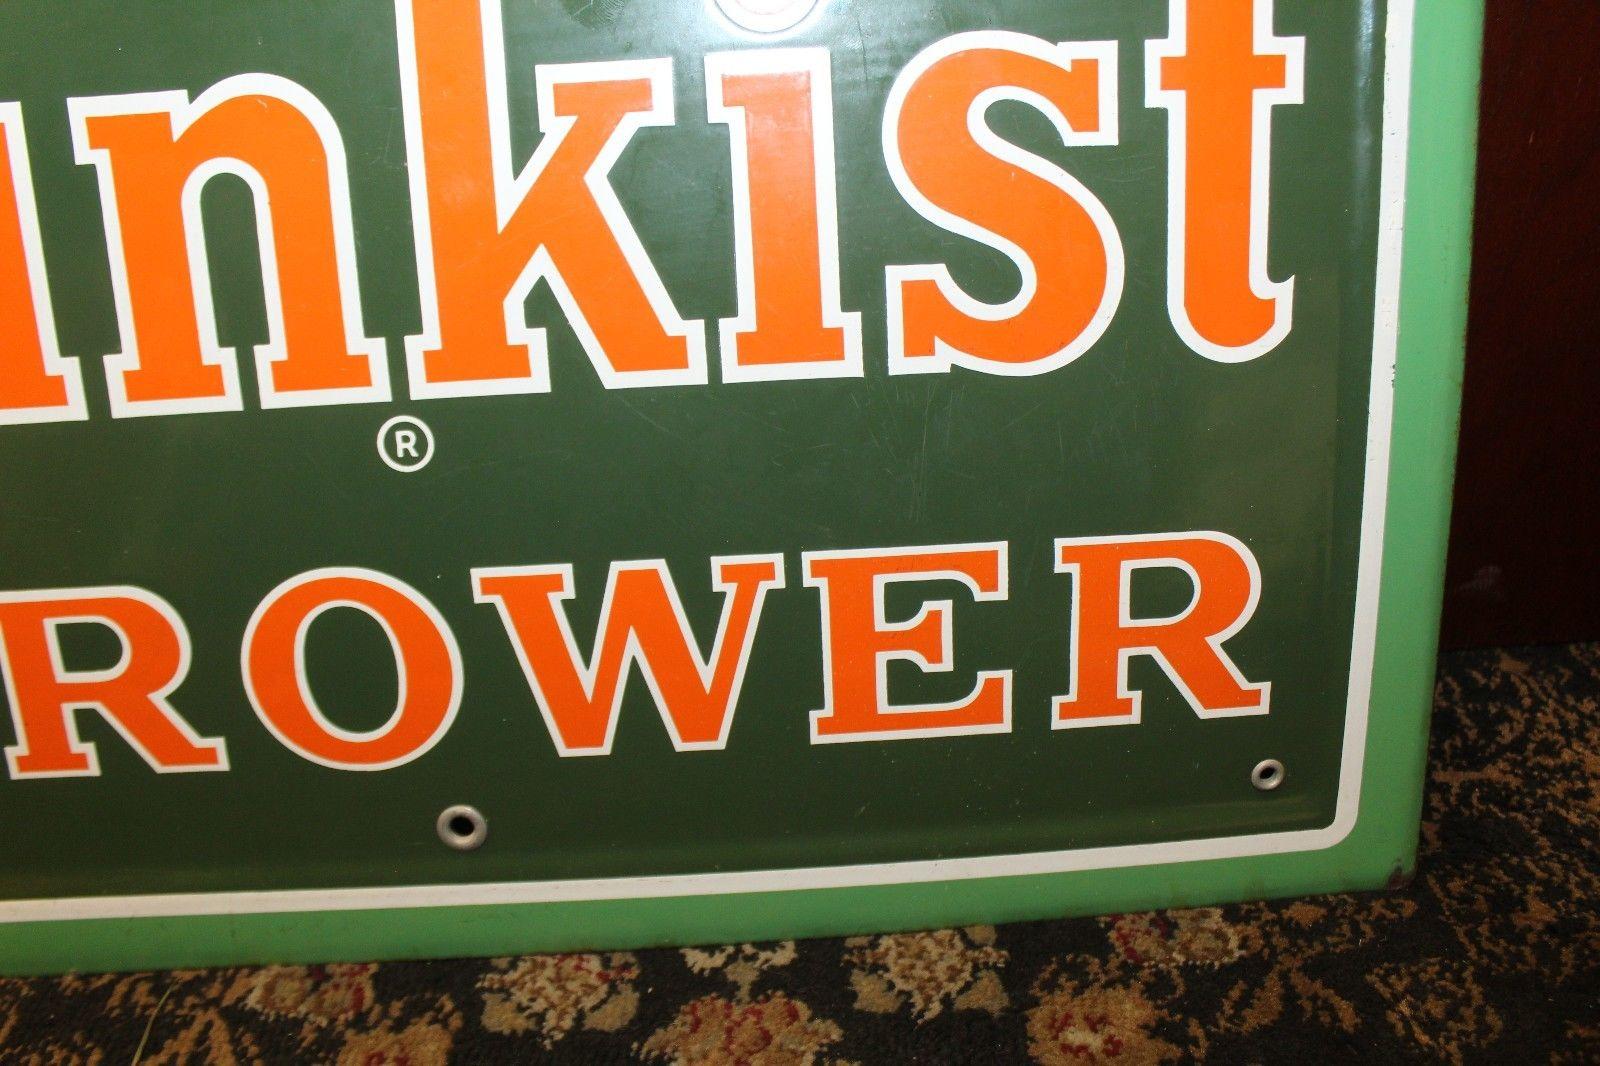 American 1940s Sunkist Grower Porcelain Sign For Sale